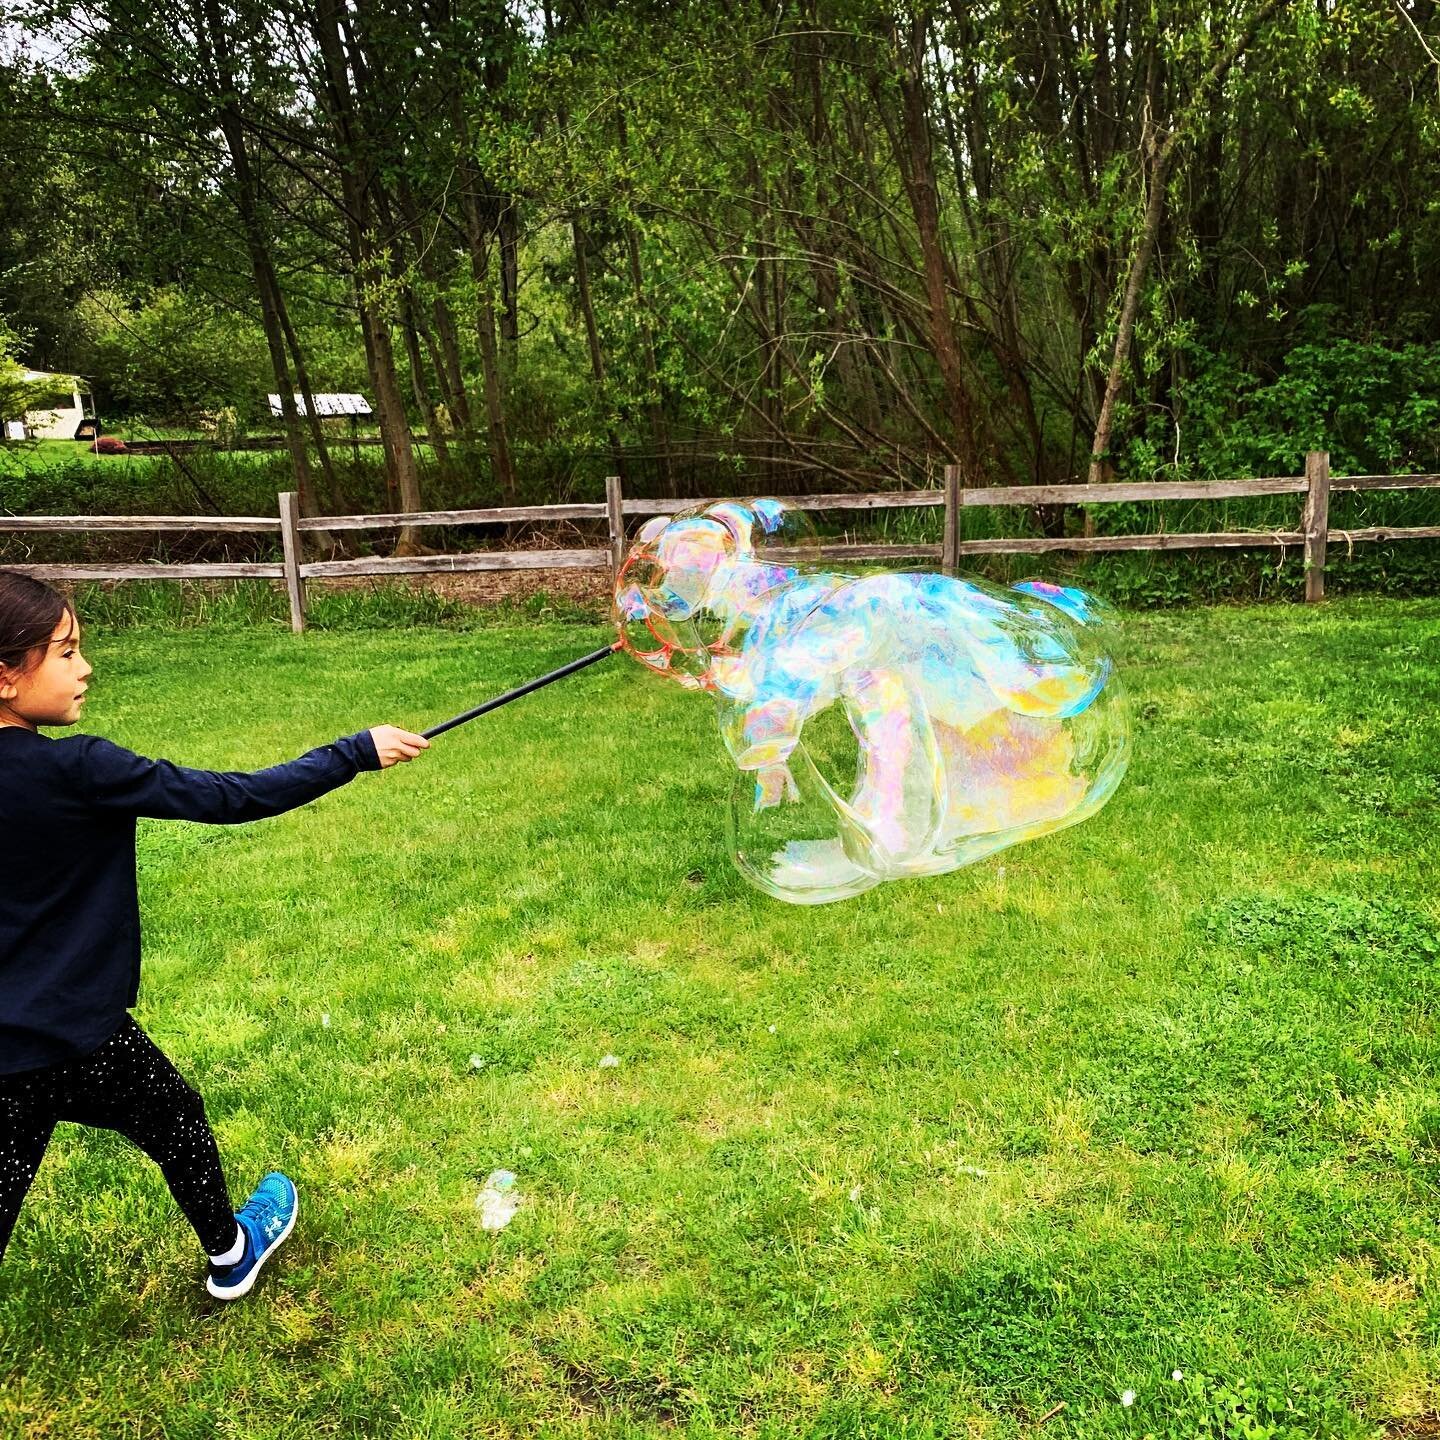 Summer is not over yet...get out and bubble! #flowerwand #bubbleworldinc #getoutandbubble